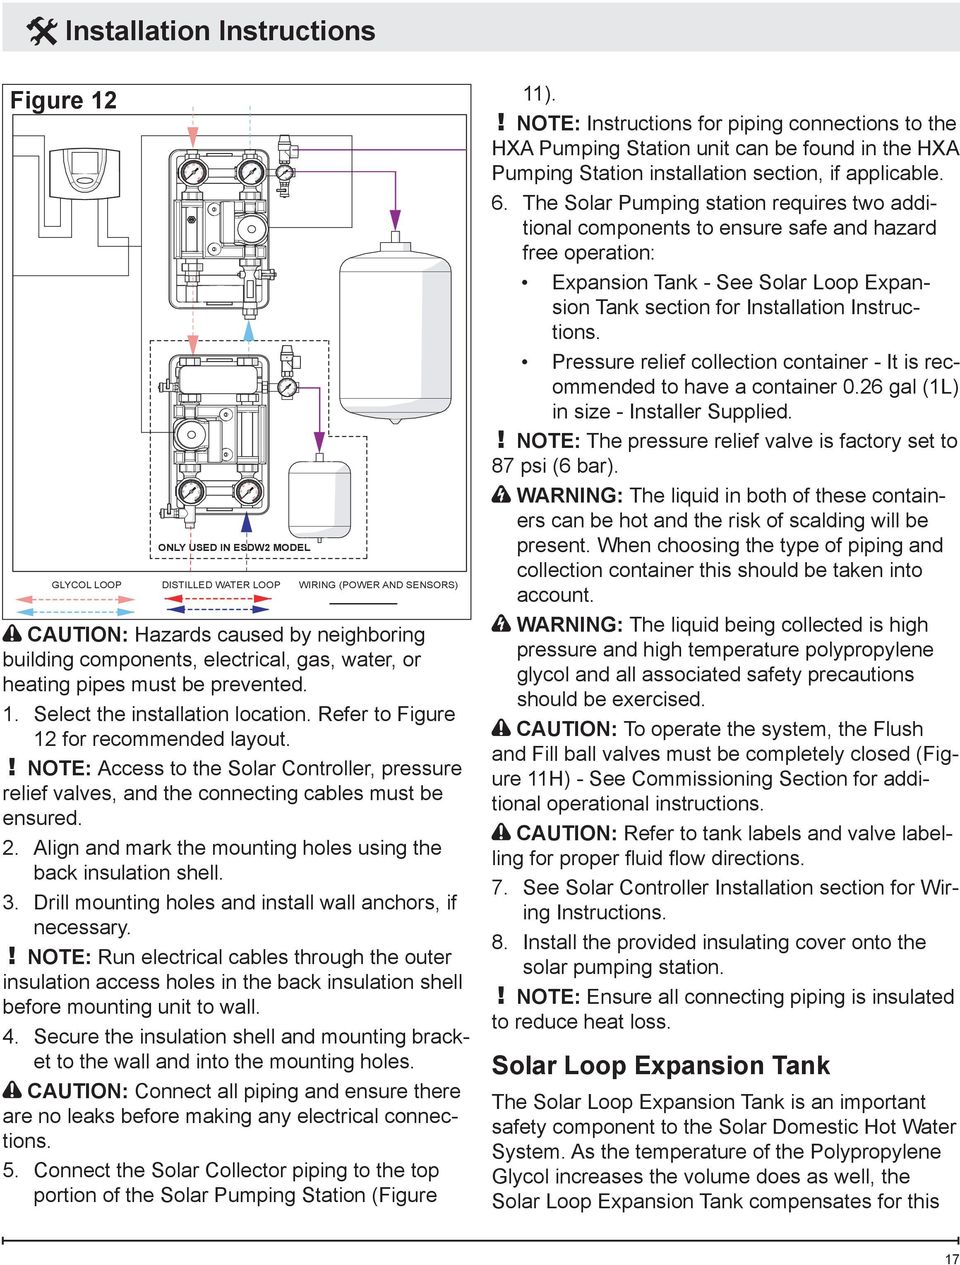 Refer to Figure 12 for recommended layout.! NOTE: Access to the Solar Controller, pressure relief valves, and the connecting cables must be ensured. 2.